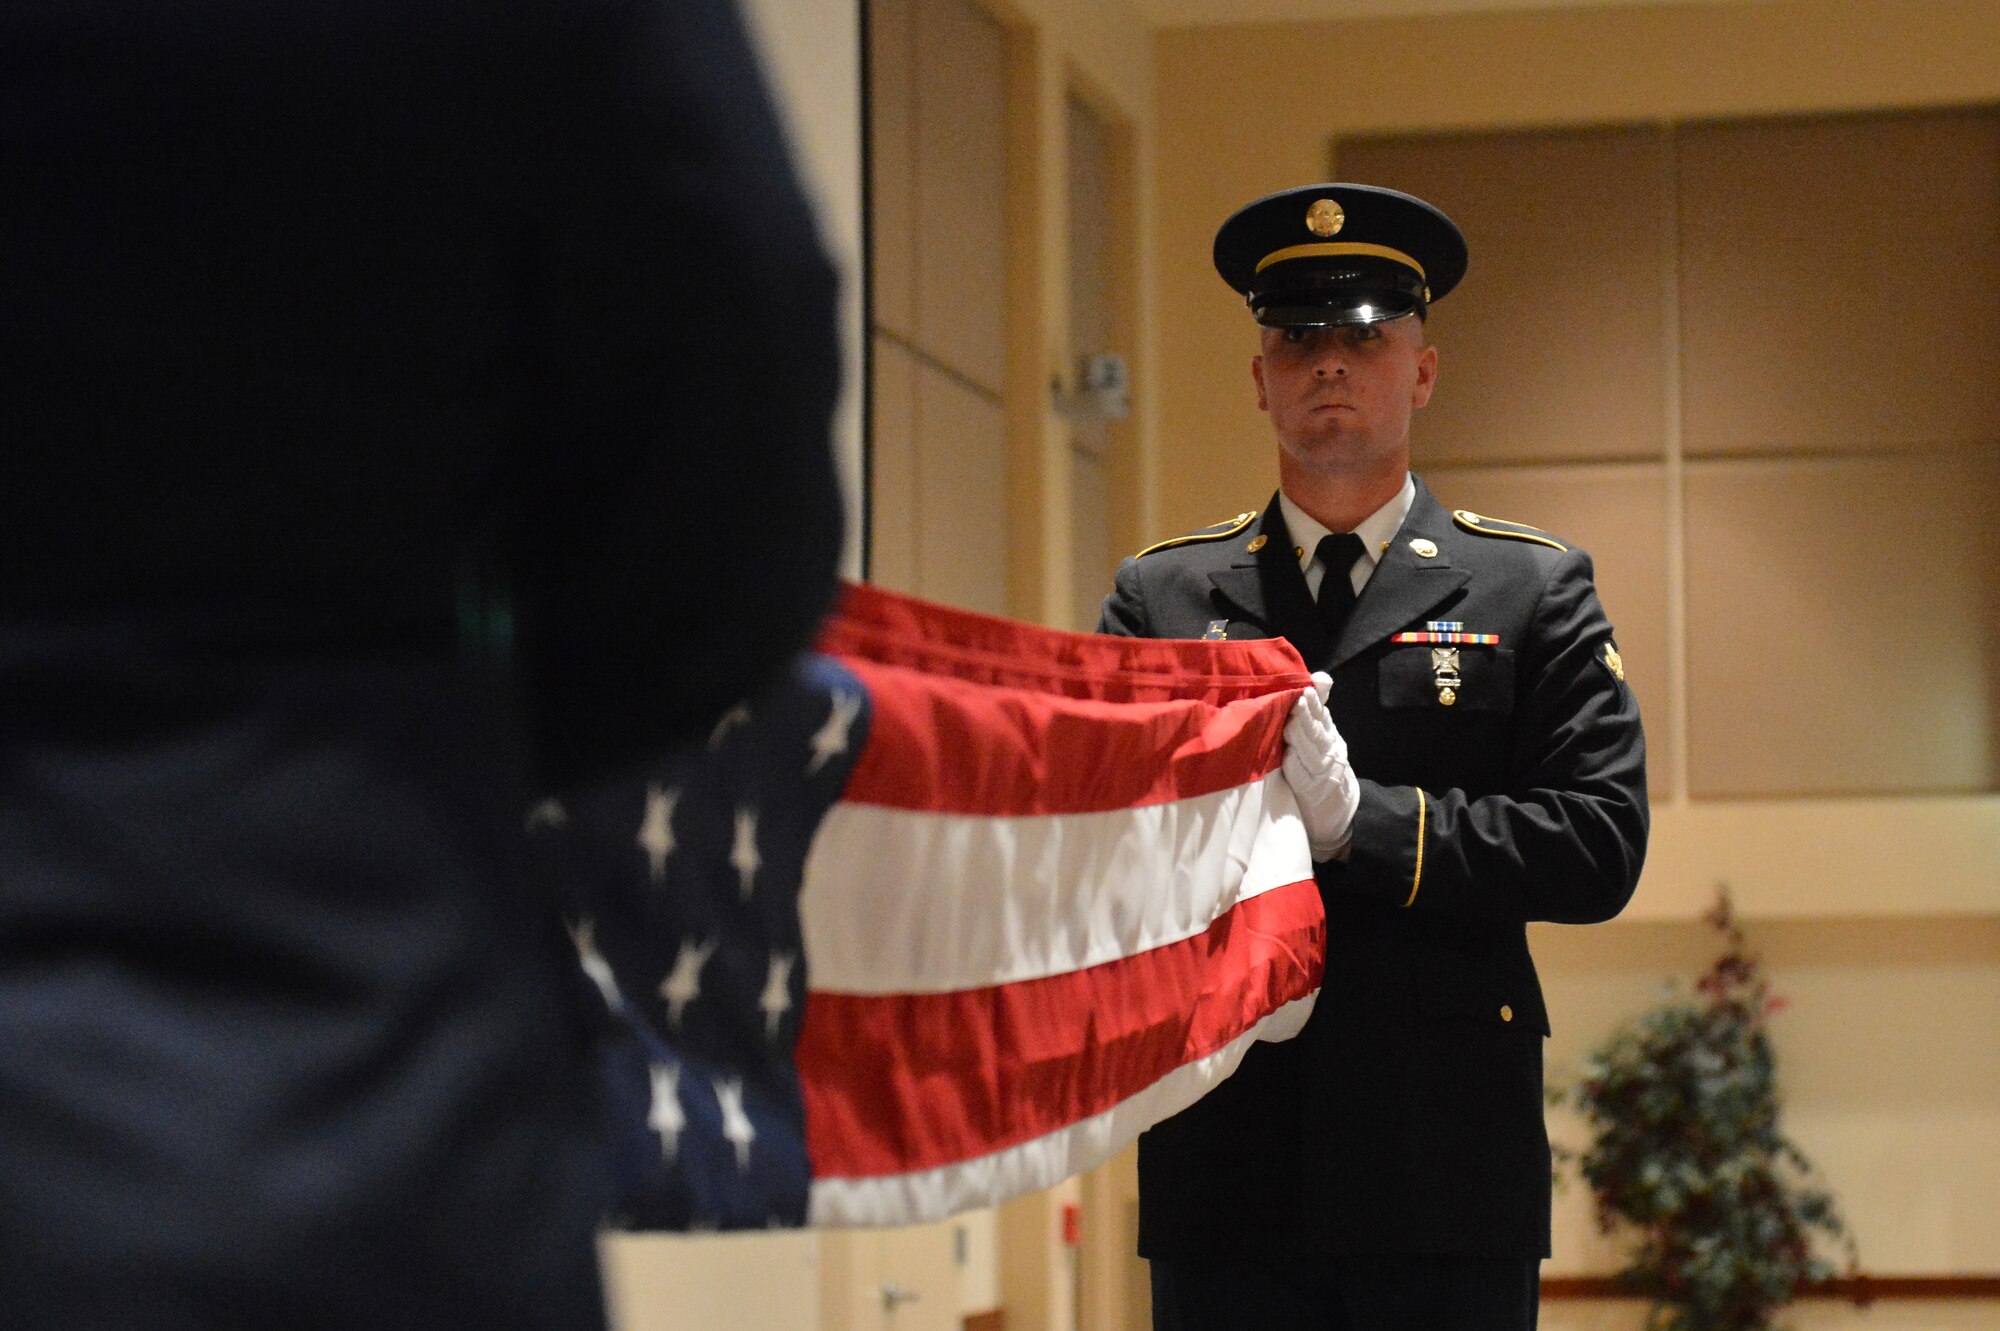 Members of the Aerospace Data Facility-Colorado Joint Color Guard fold a U.S. flag during the Veterans Day ceremony at the Leadership Development Center Nov. 13, 2015, on Buckley Air Force Base, Colo. Aside from the flag-folding ceremony, the event included a guest speaker. (U.S. Air Force photo by Staff Sgt. Darren Scott/Released)